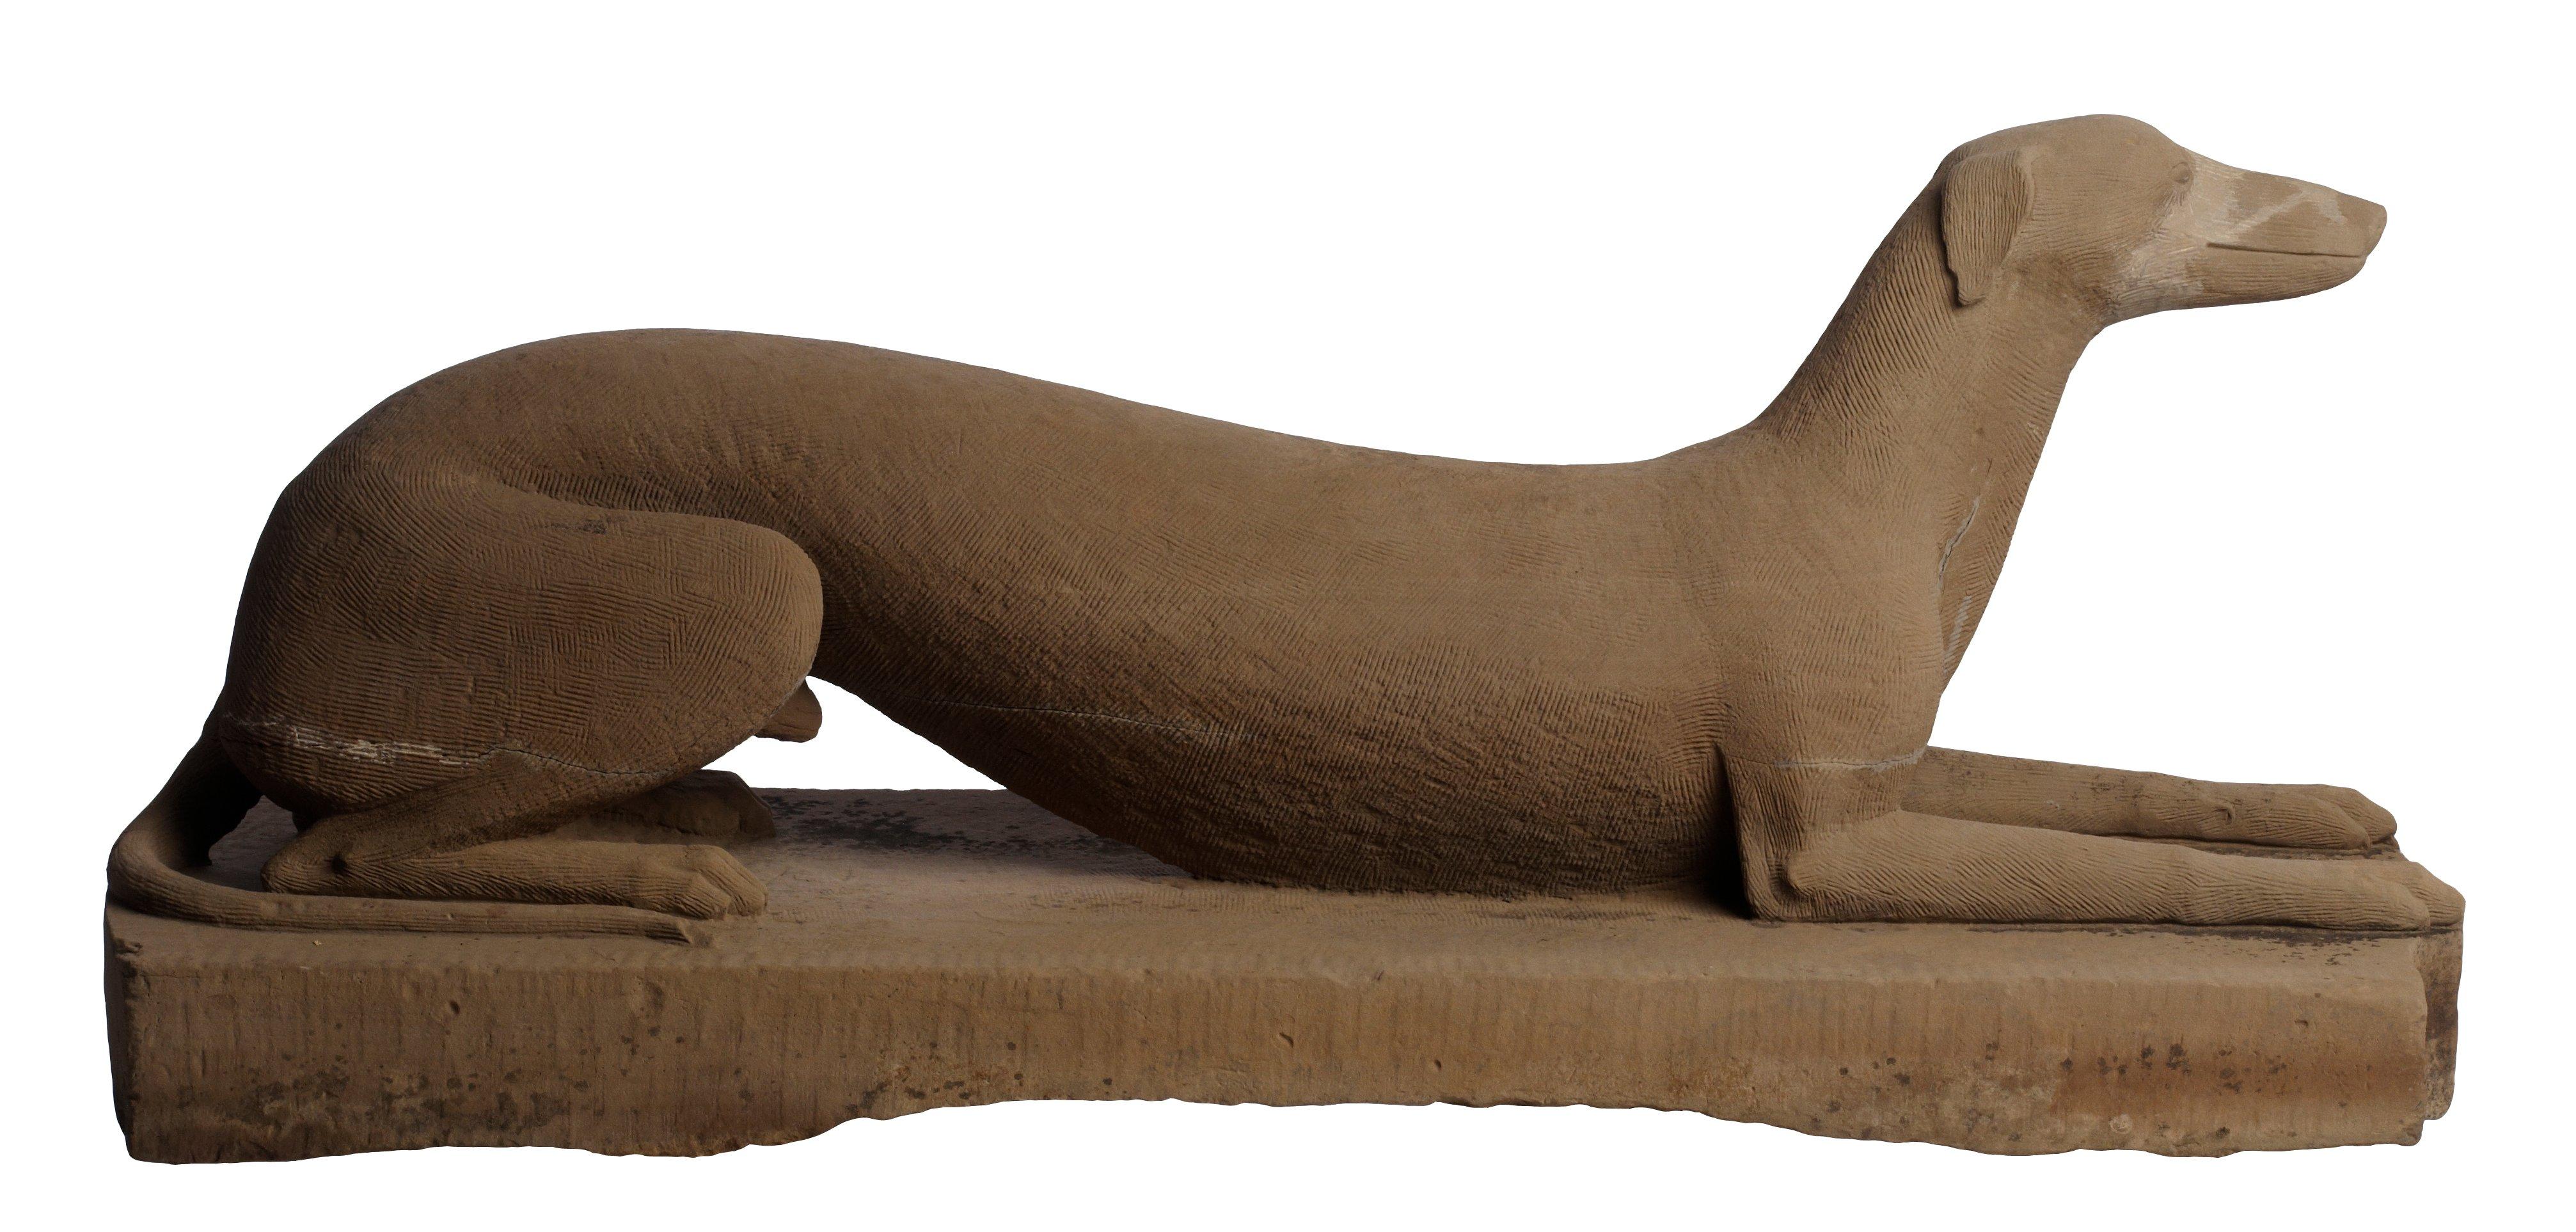 American Carved Greyhound Statue For Sale